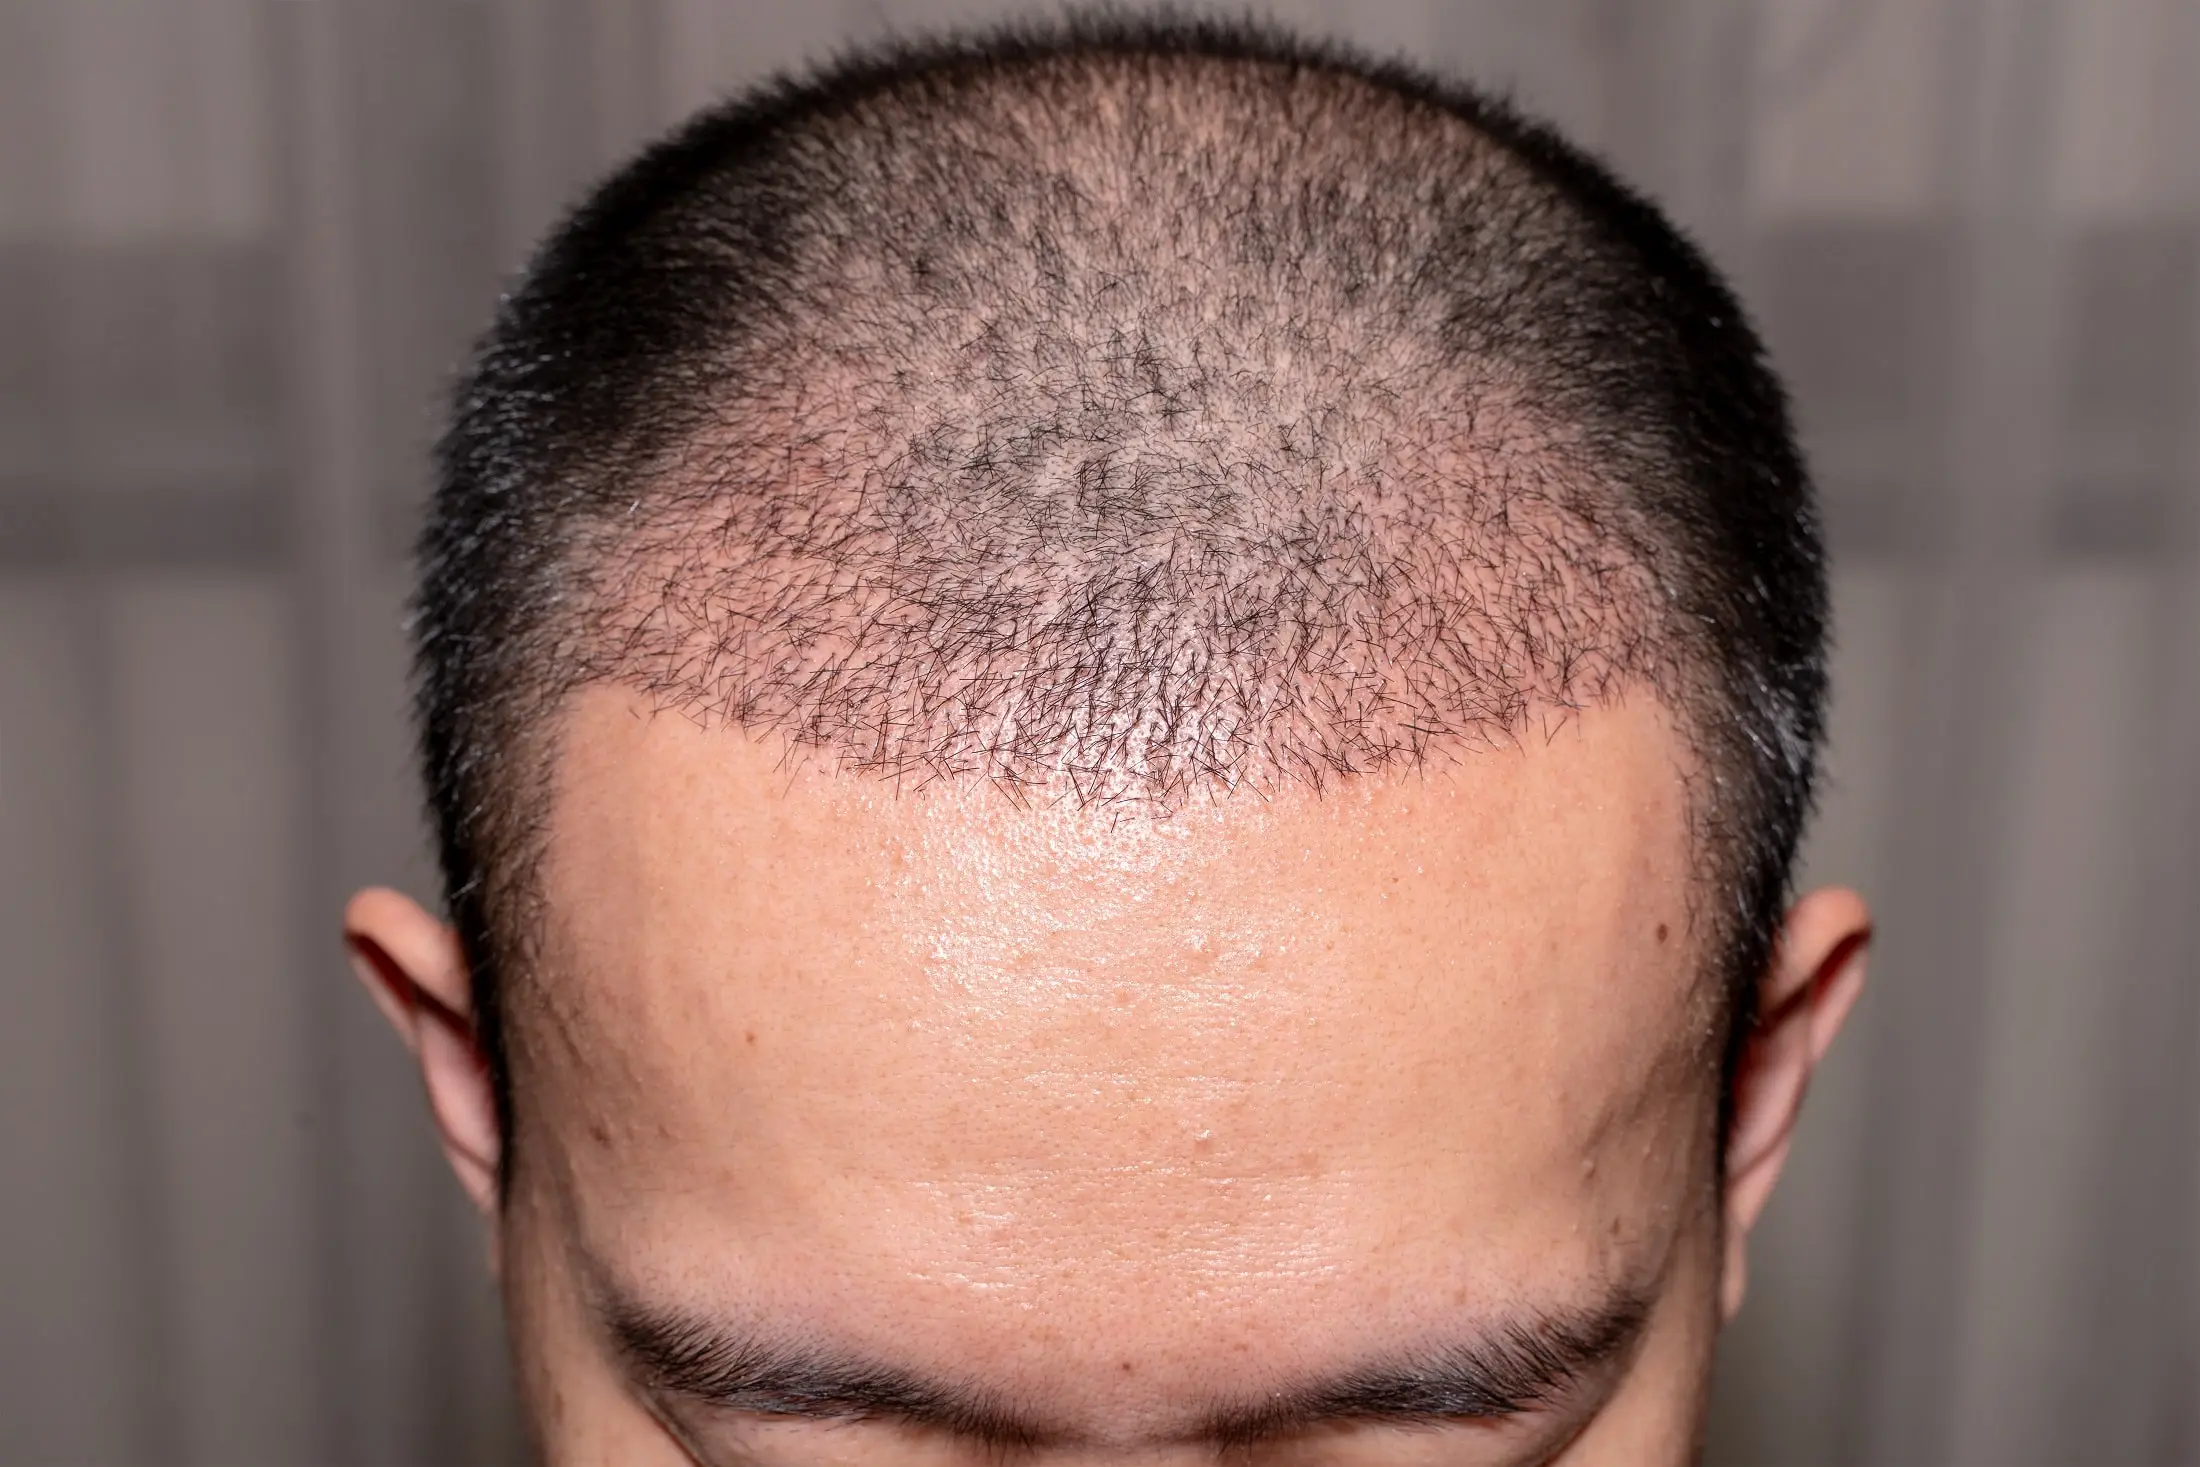 Is a Hair Transplant Permanent? | Hair of Istanbul